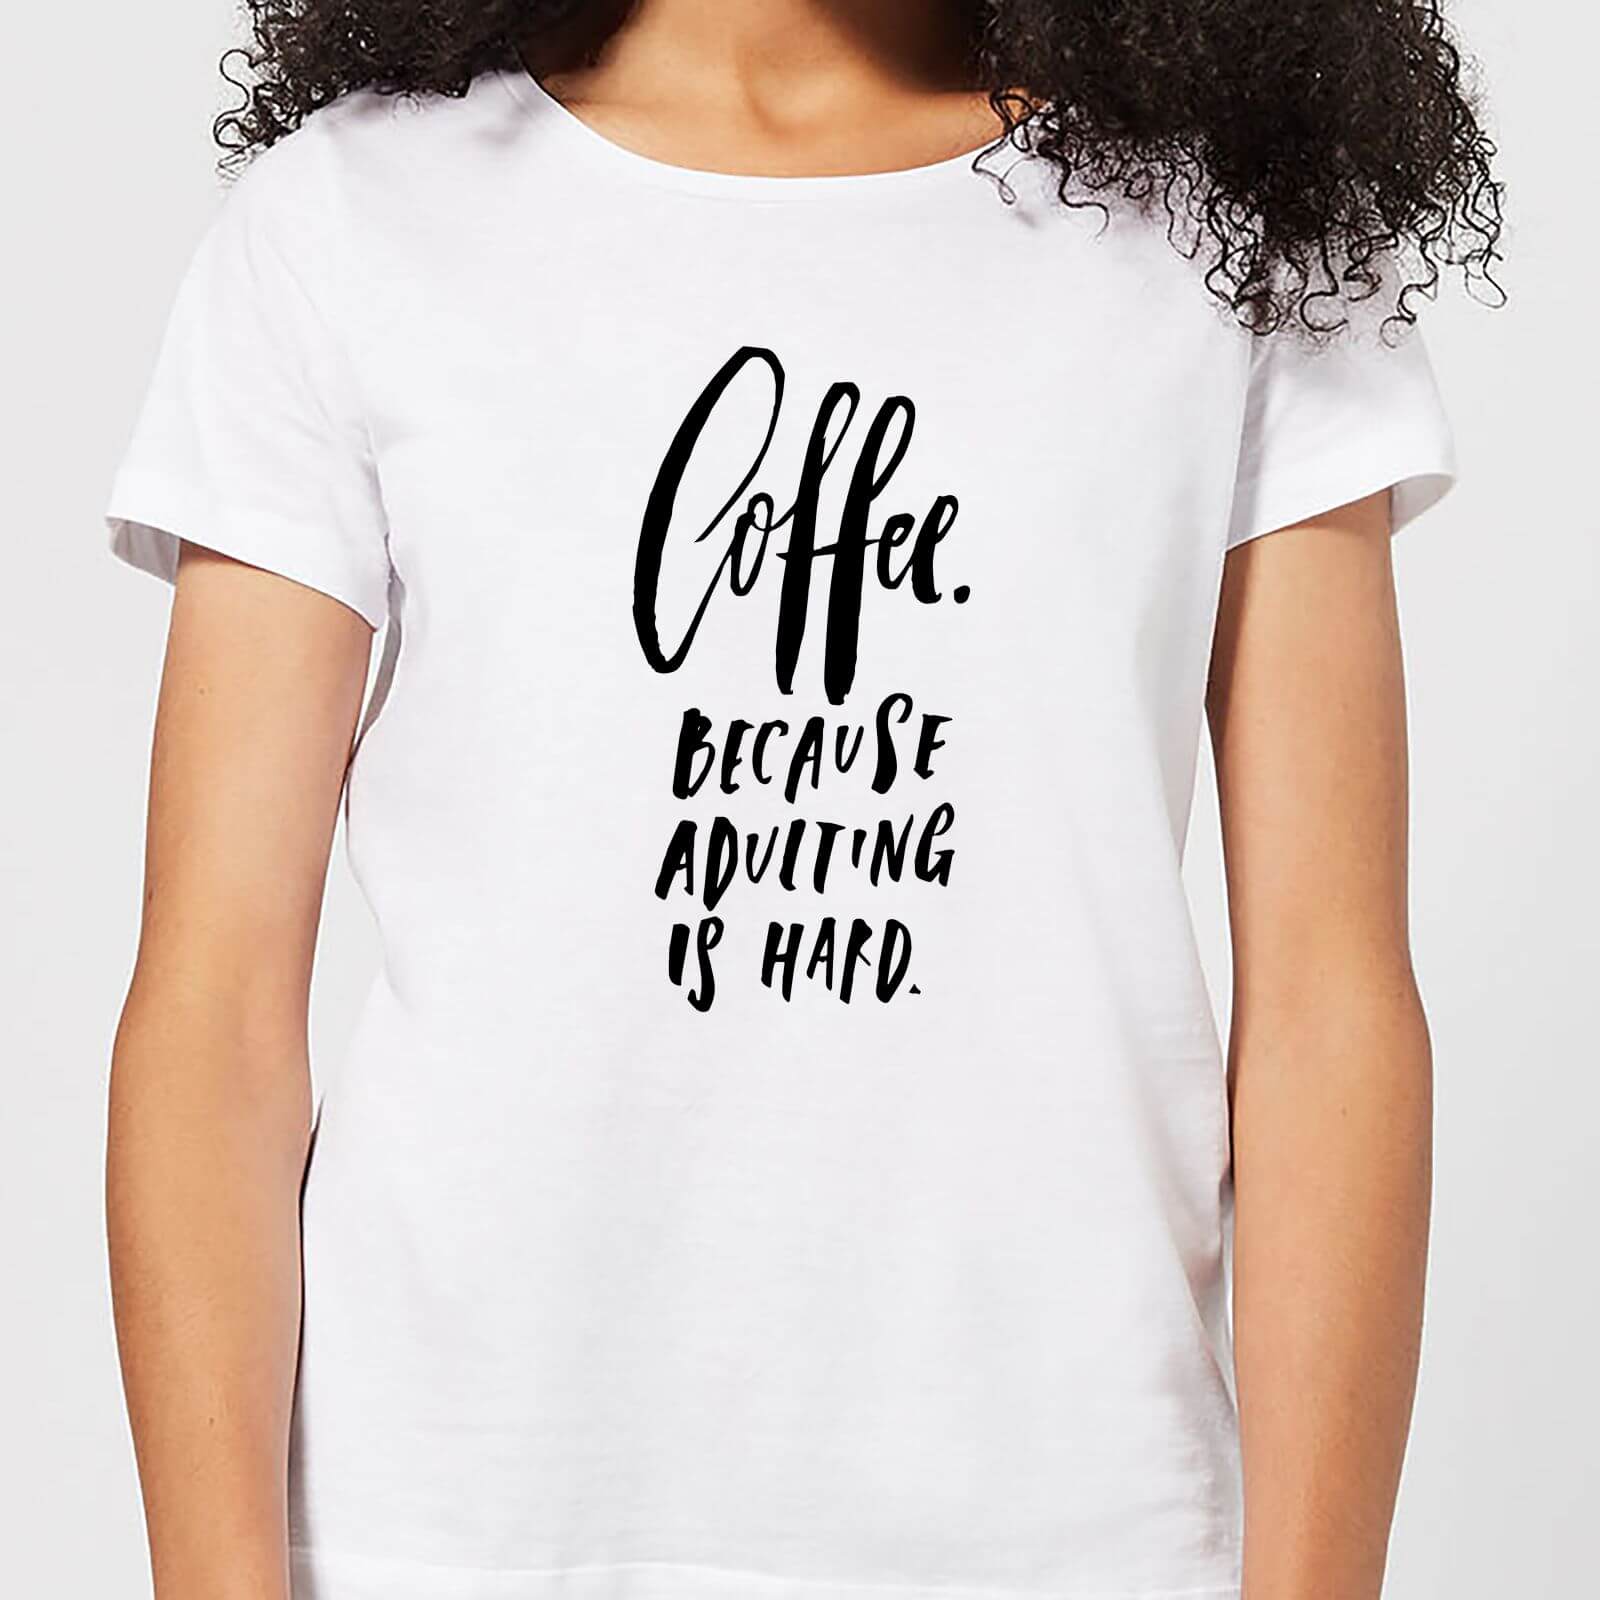 Because Adulting Is Hard Women's T-Shirt - White - M - White